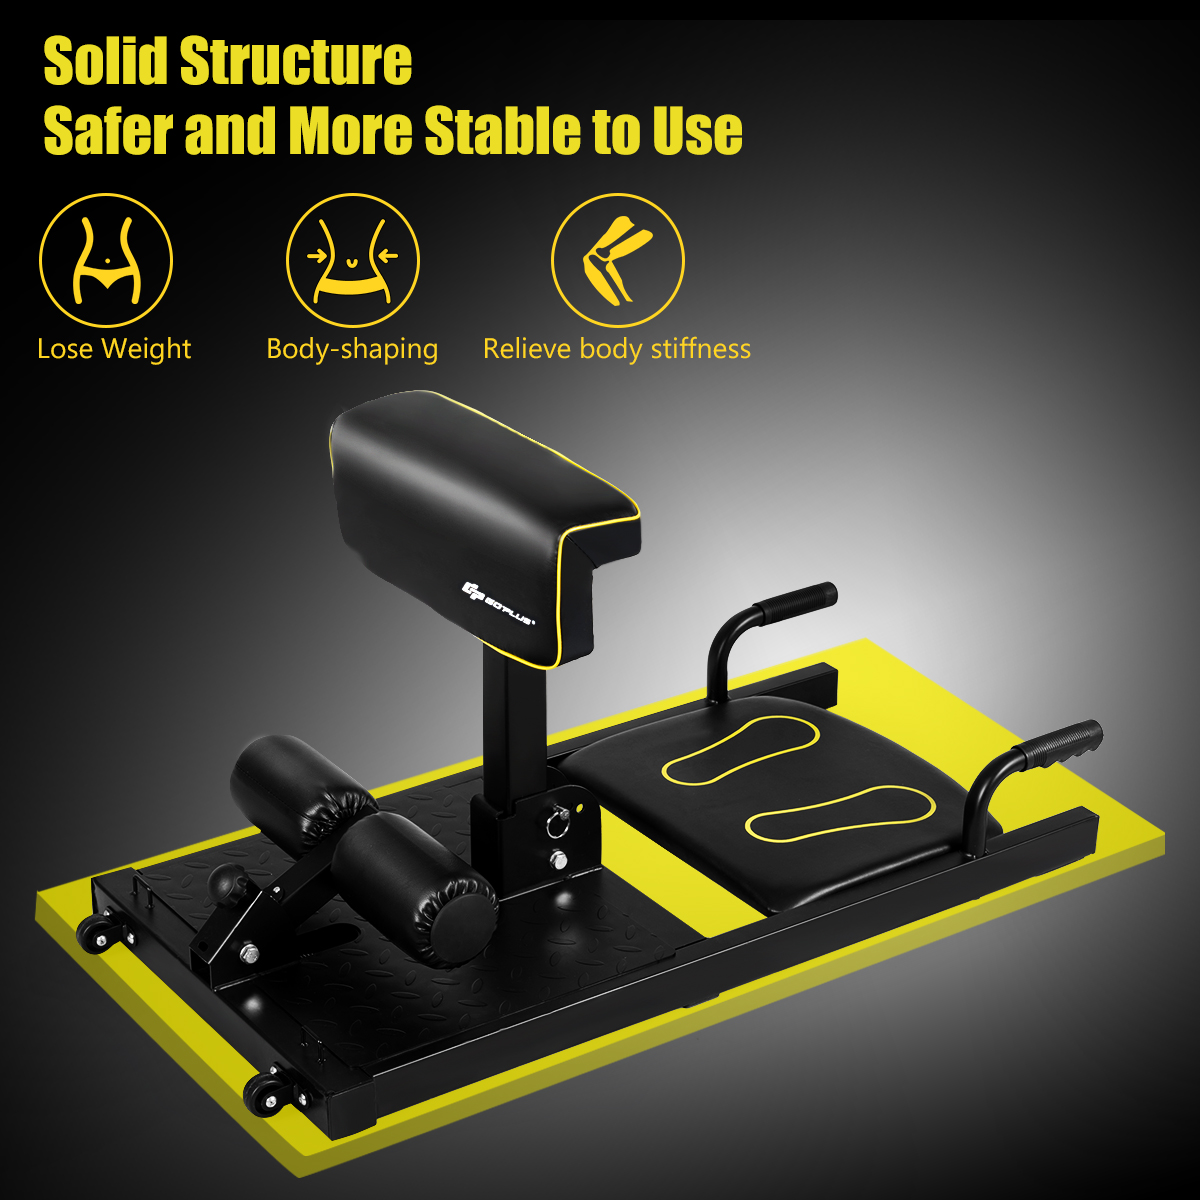 Gpolus 8-in-1 Multifunction Squat Machine Deep Sissy Squat Home Gym Fitness Ab Trainer - image 10 of 10